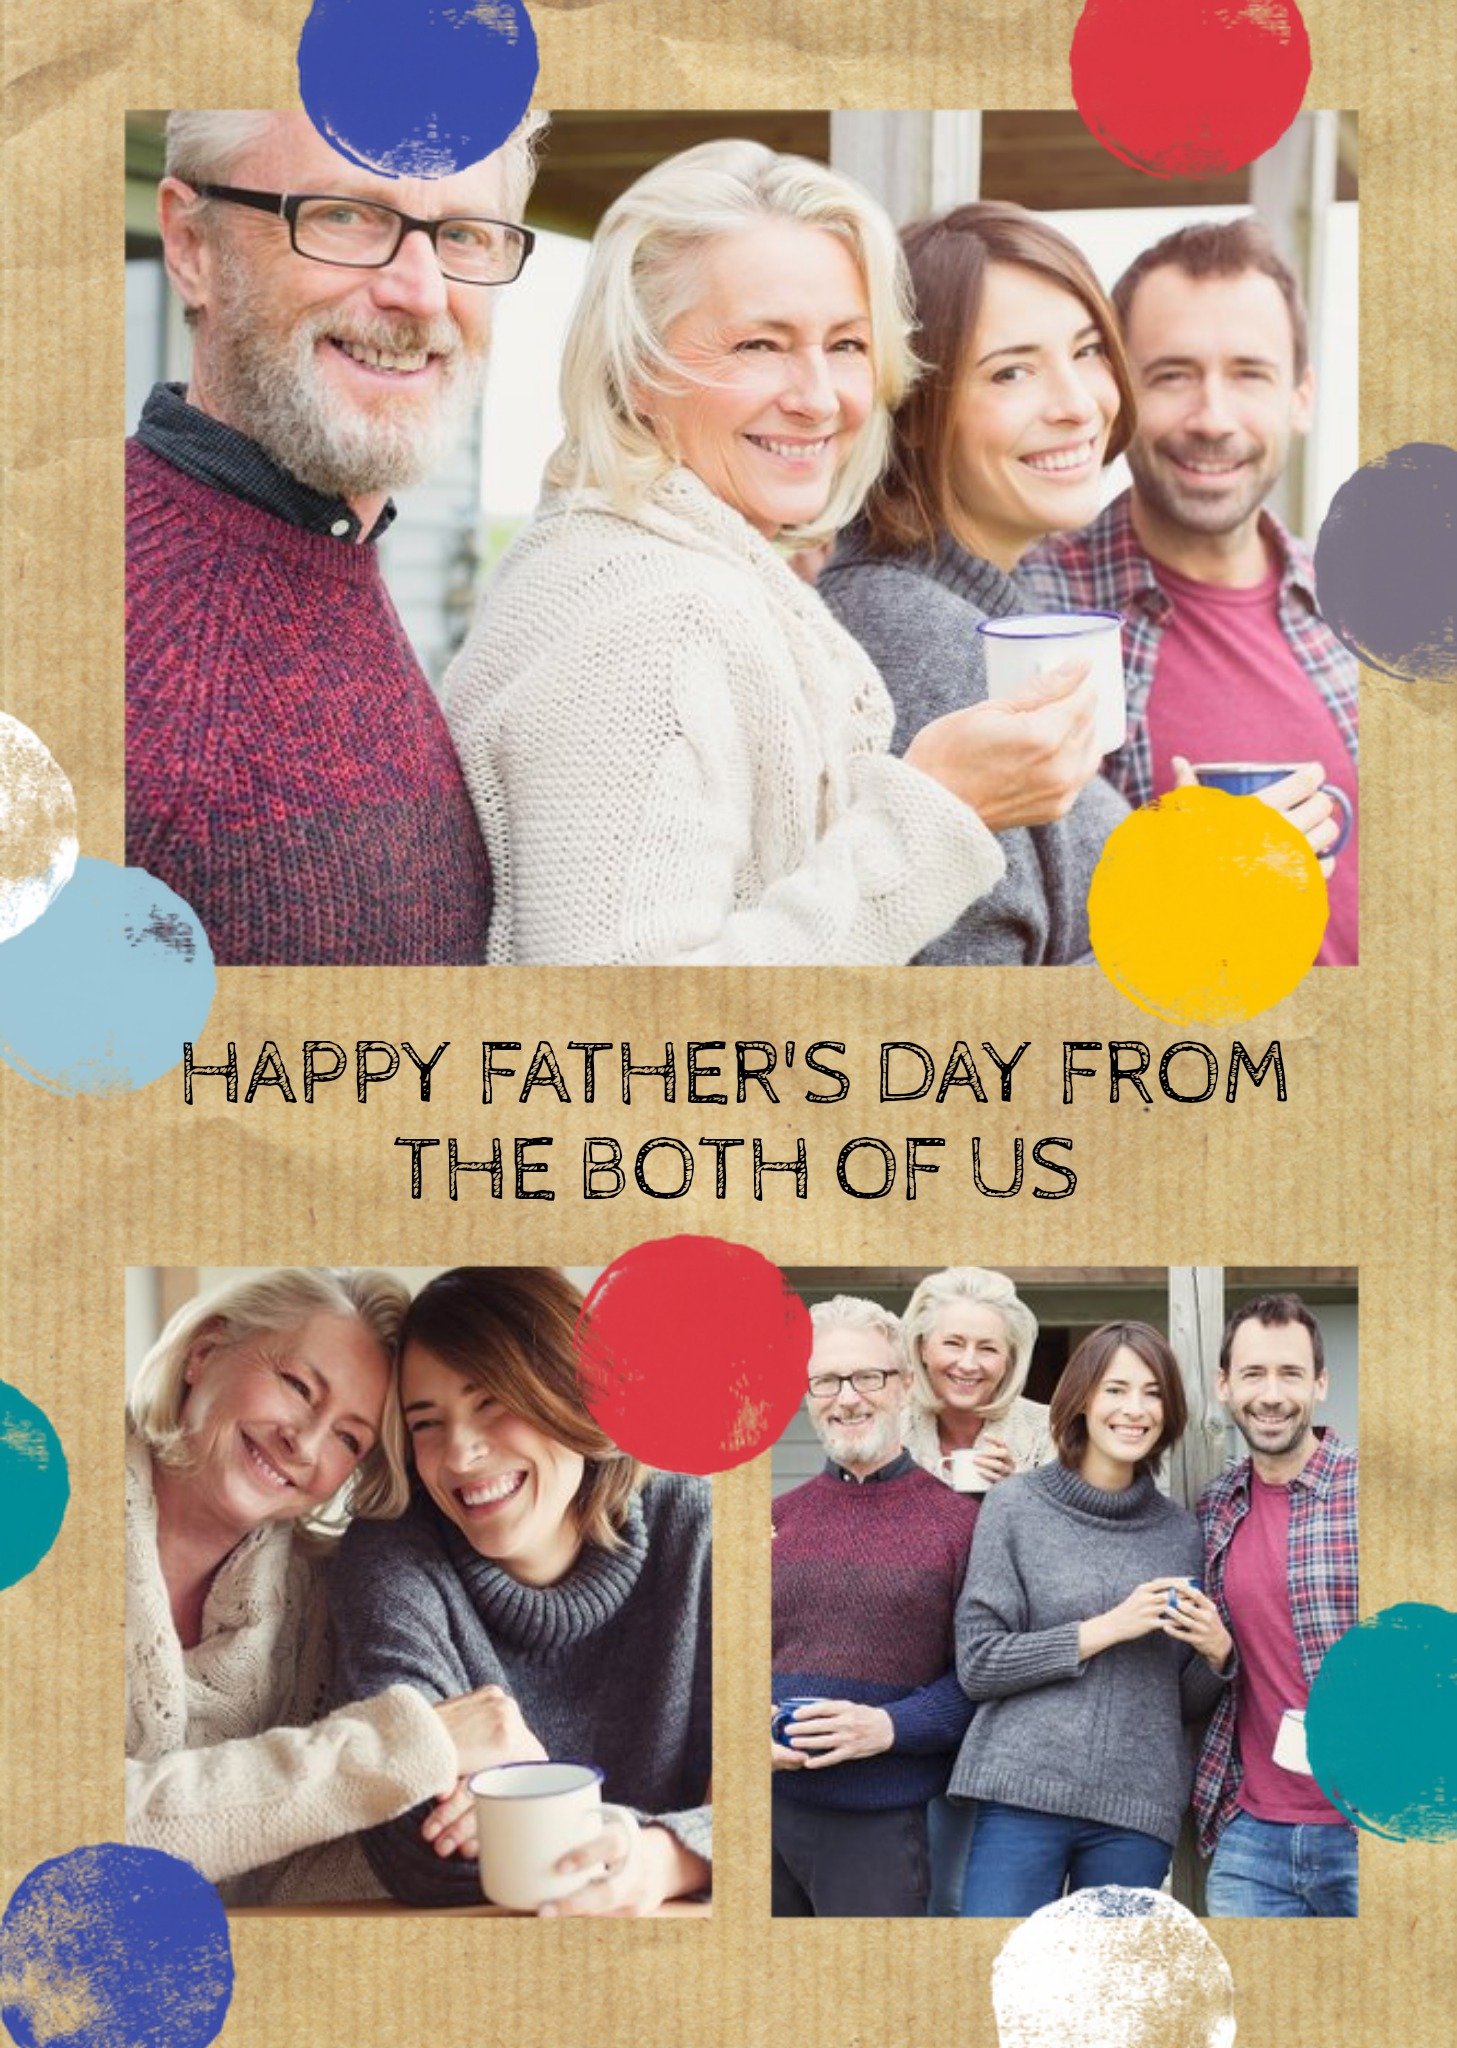 Moonpig Colourful Polka Dots Happy Fathers Day From The Both Of Us Photo Card, Large